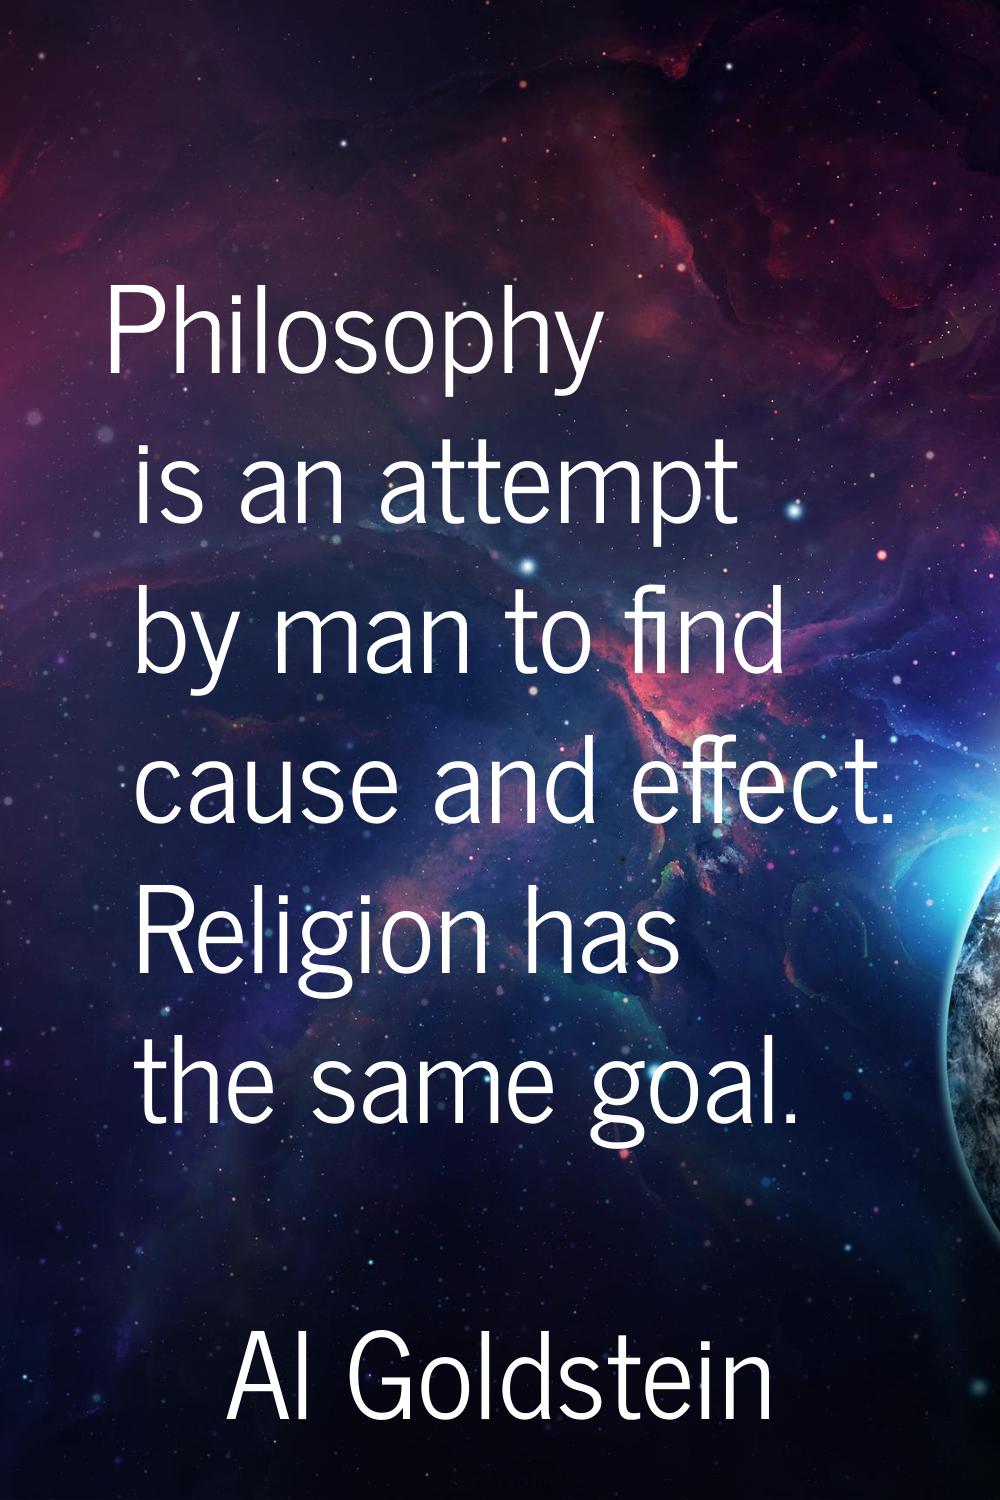 Philosophy is an attempt by man to find cause and effect. Religion has the same goal.